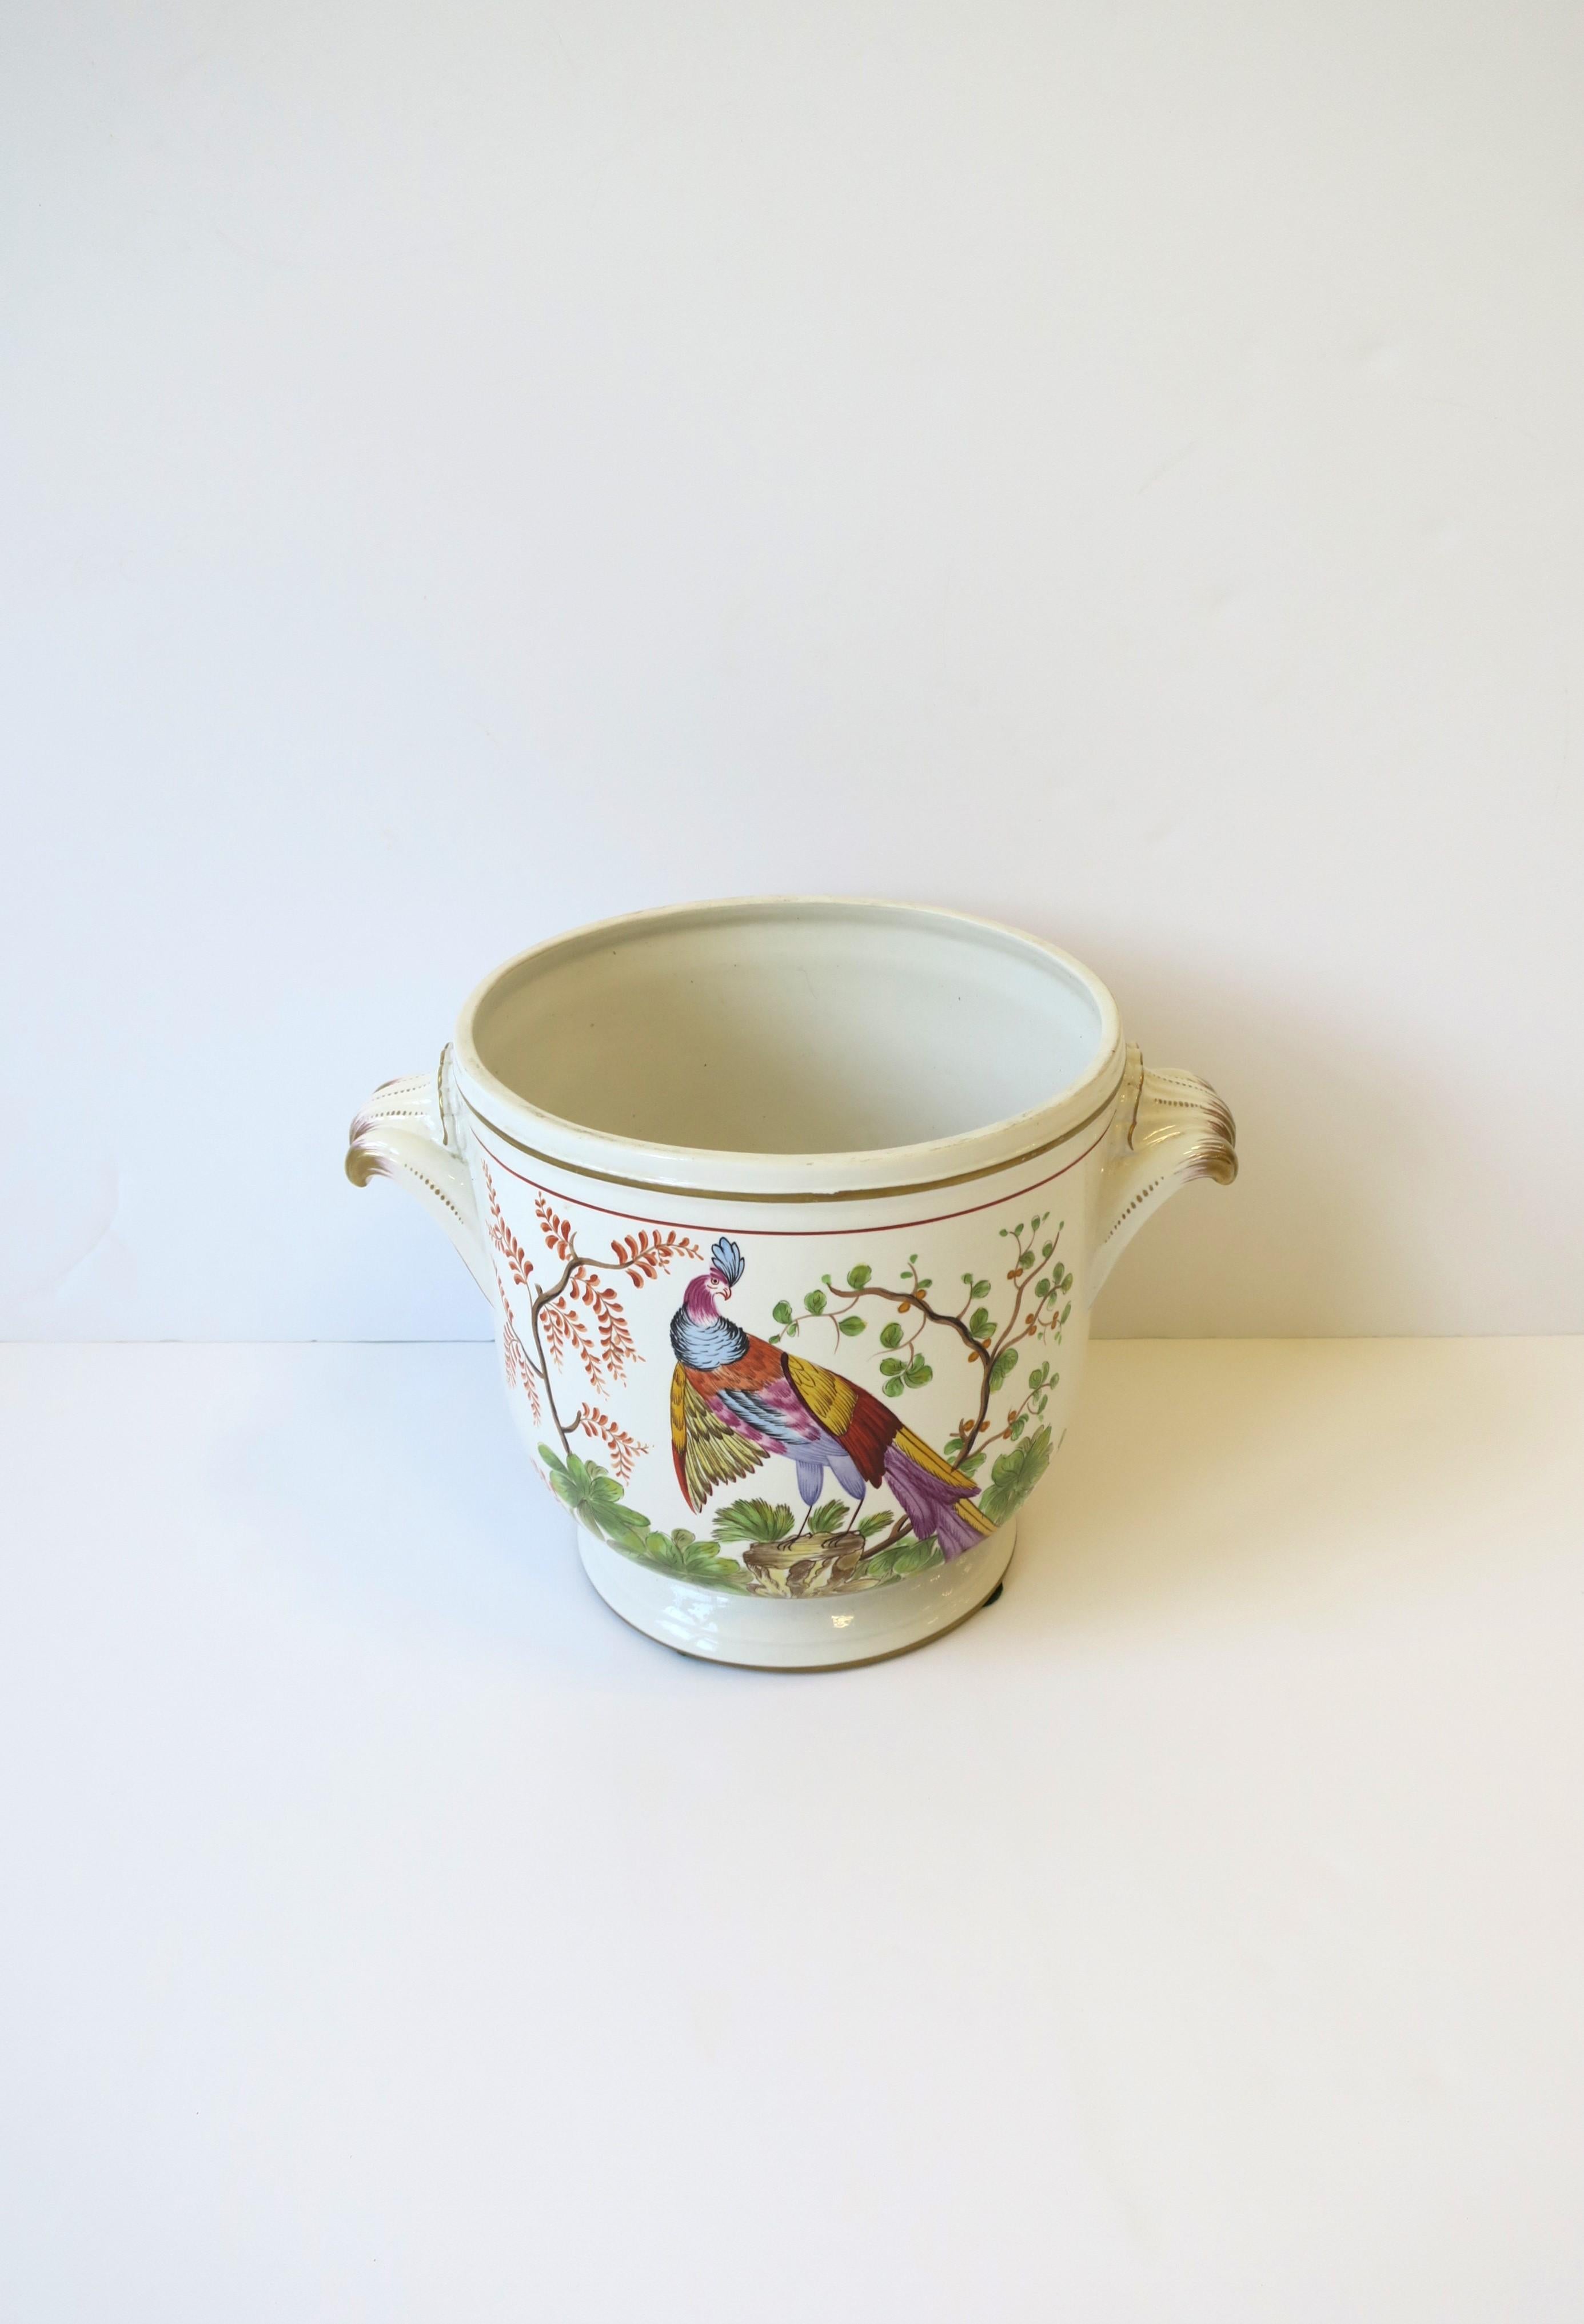 Ceramic Italian Flower Planter Cachepot Jardinière Peacock Bird by Mottahedeh, Italy For Sale